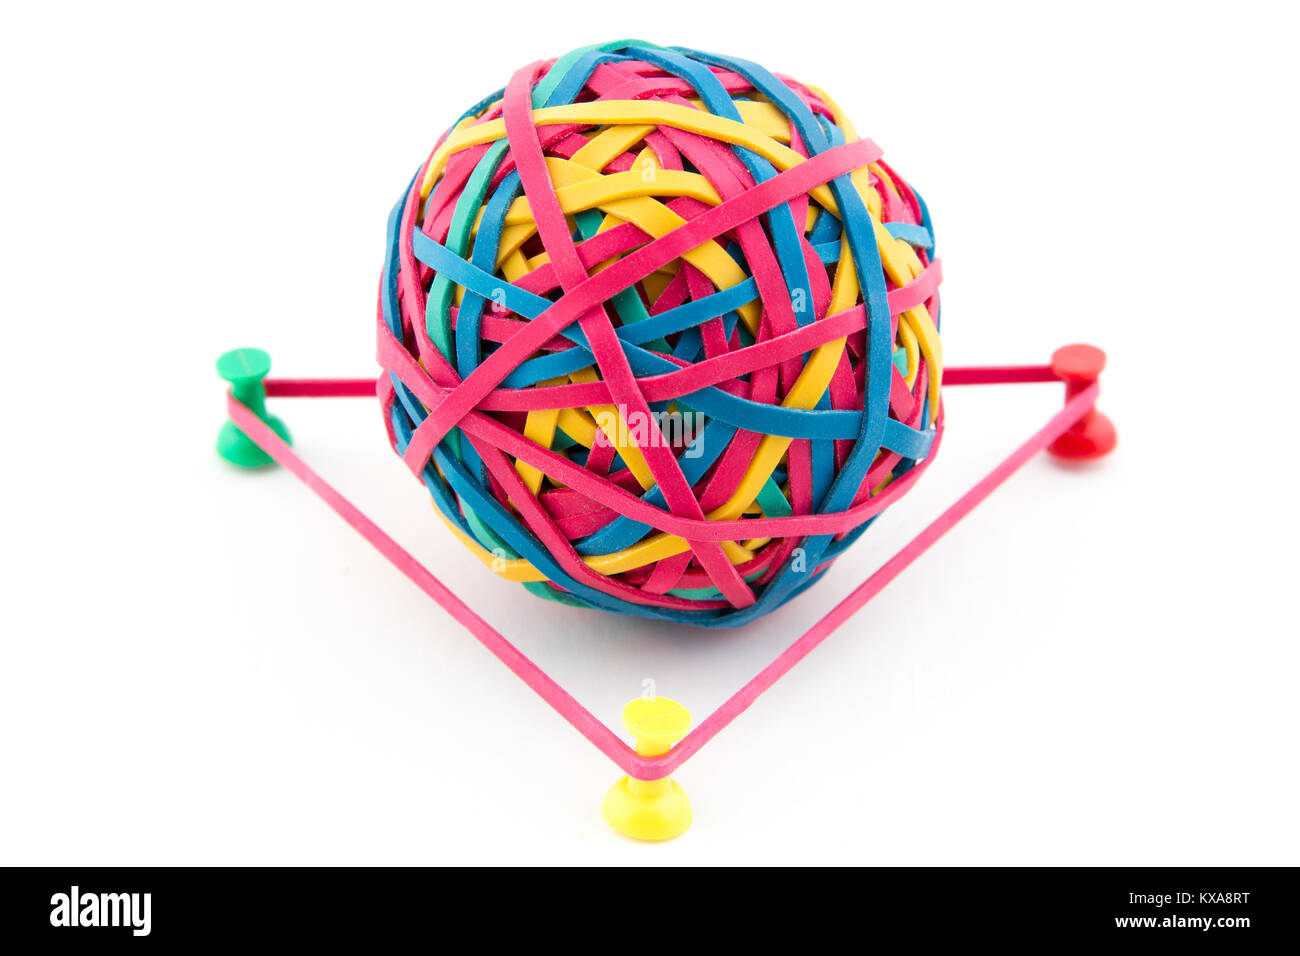 Geometry concept using a Rubber band ball Stock Photo